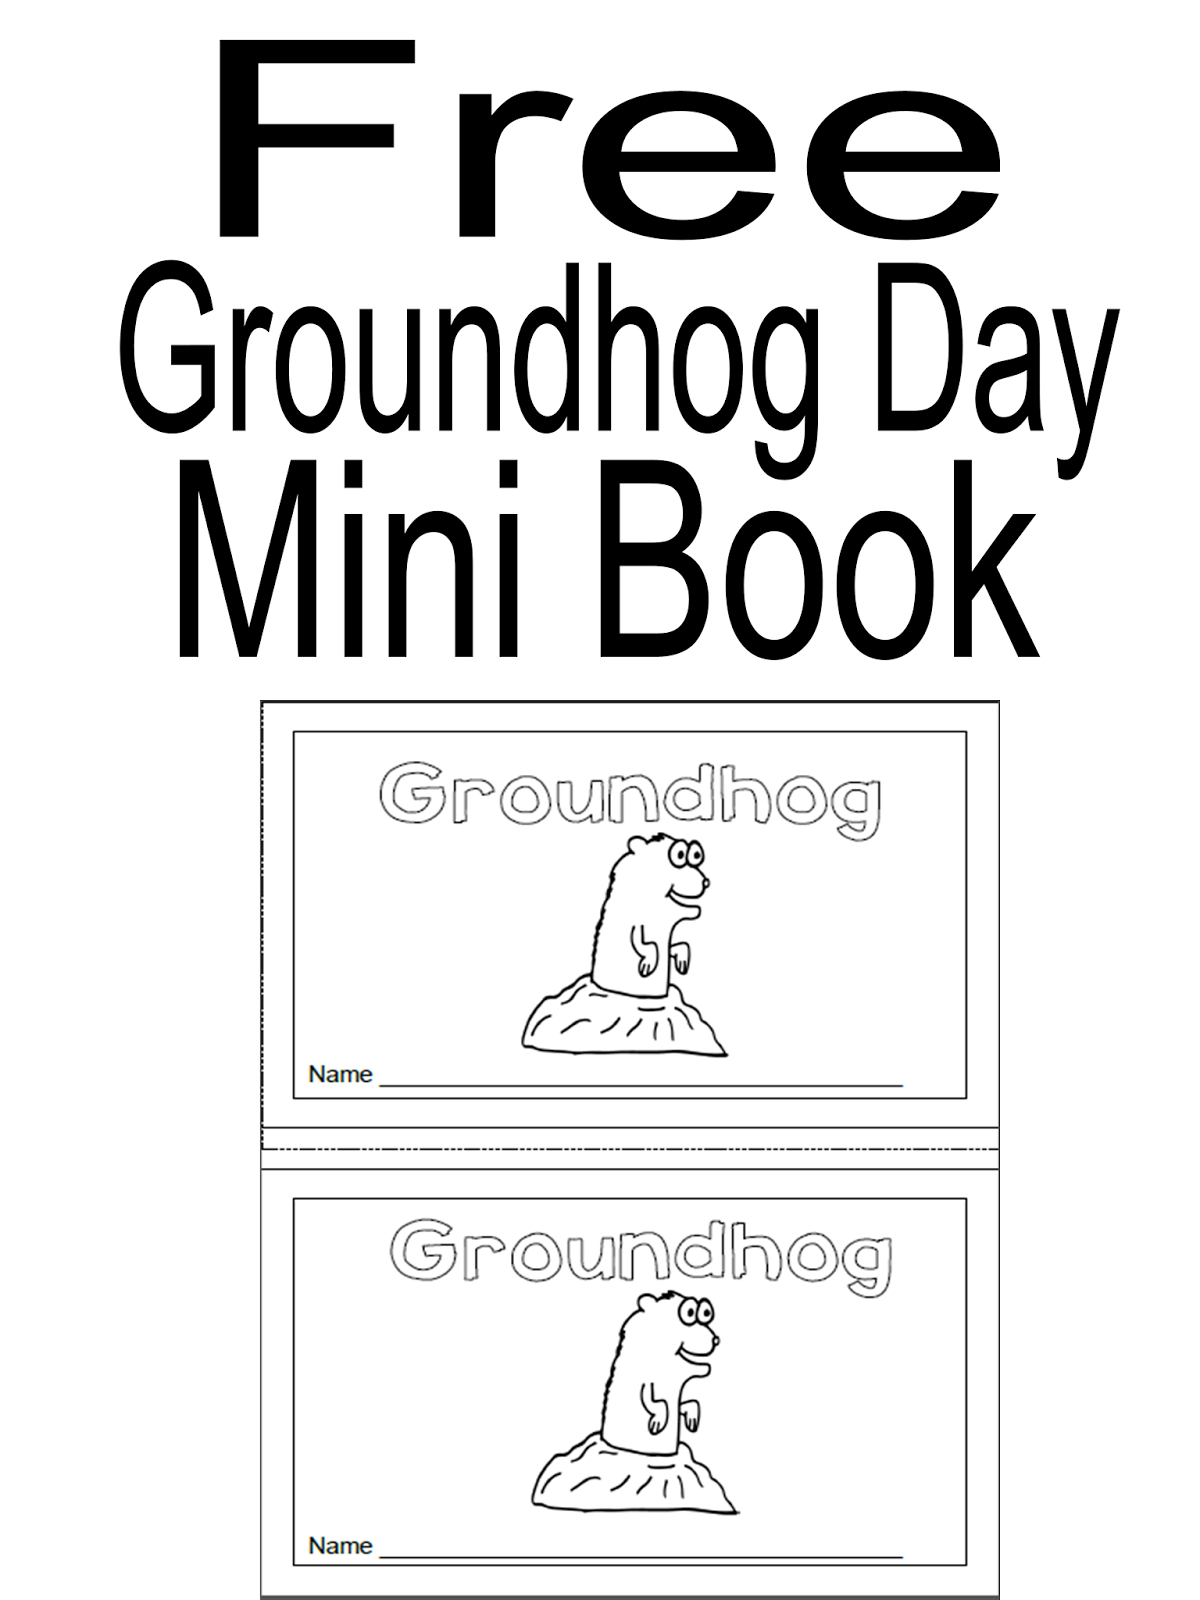 simply-centers-free-groundhog-day-mini-book